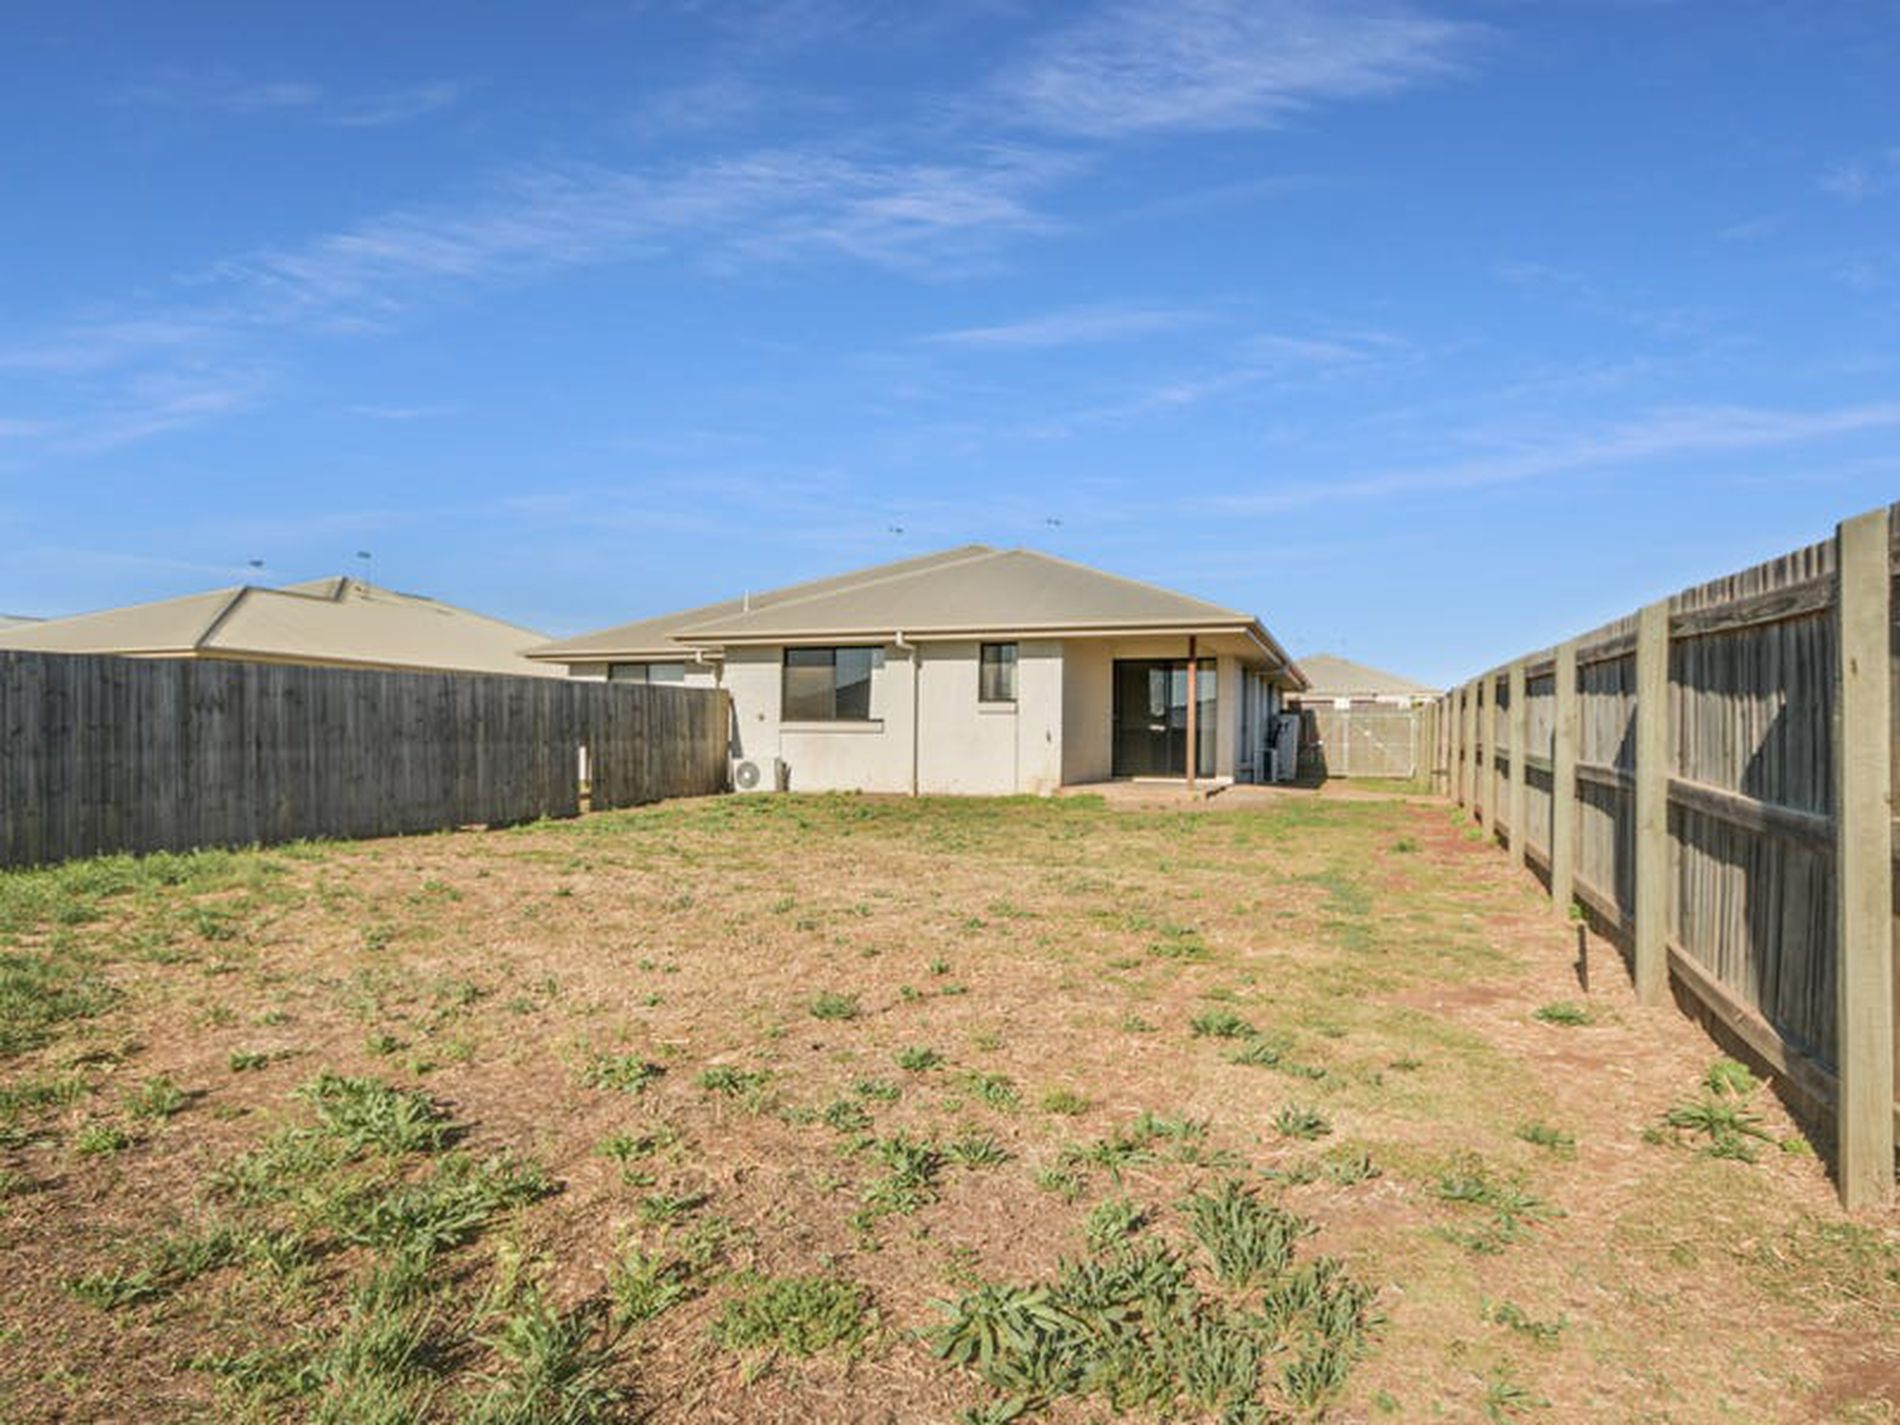 Unit 1 / 27 Weebah Place, Cambooya